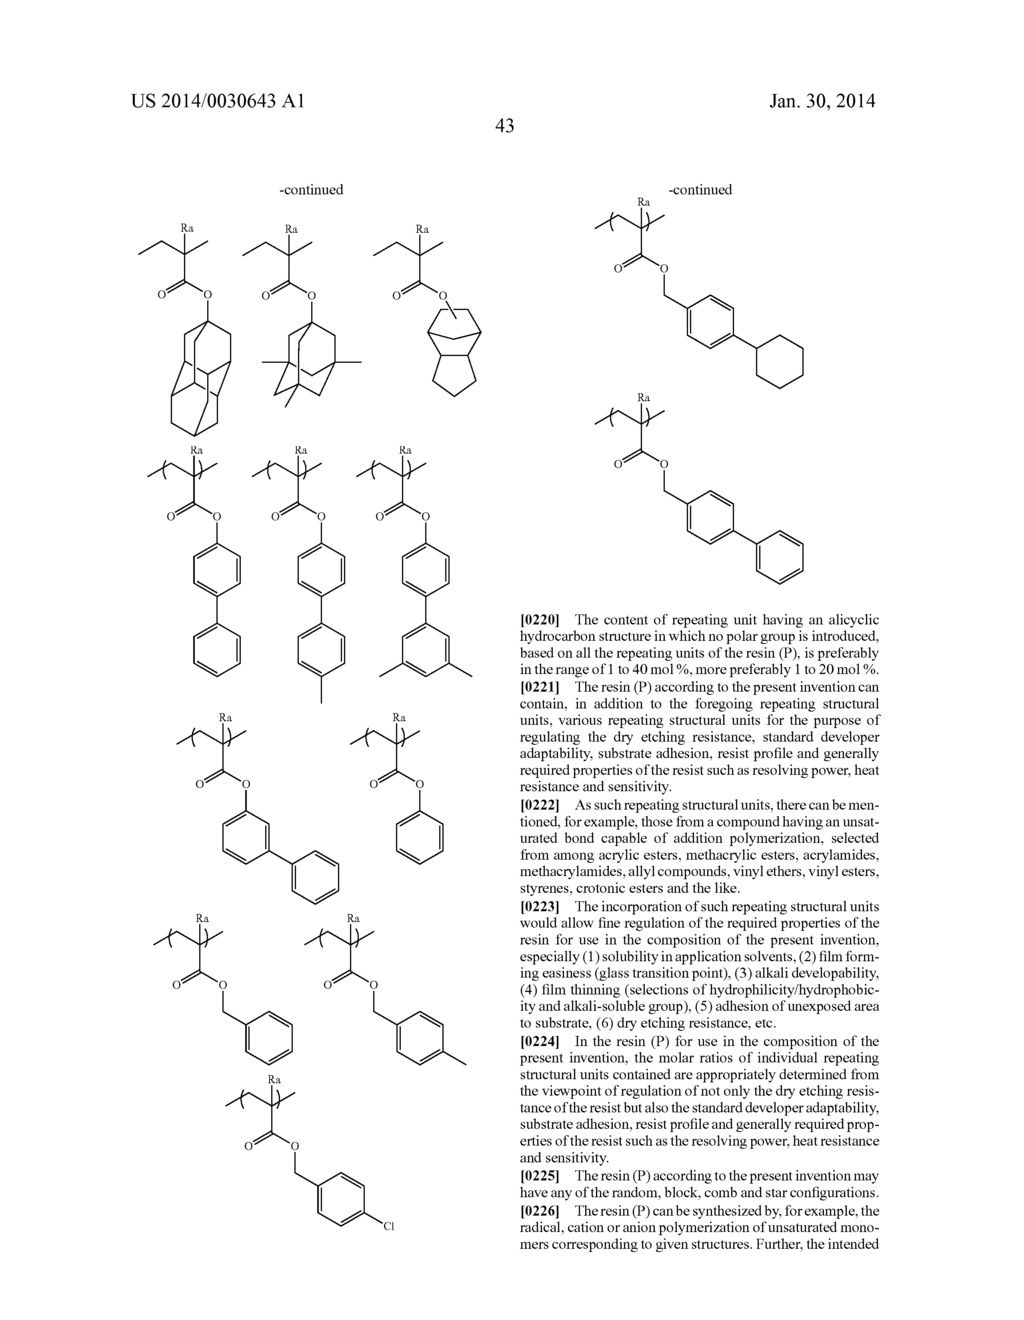 ACTINIC-RAY-OR RADIATION-SENSITIVE RESIN COMPOSITION, ACTINIC-RAY- OR     RADIATION-SENSITIVE RESIN FILM THEREFROM AND METHOD OF FORMING PATTERN     USING THE COMPOSITION - diagram, schematic, and image 45